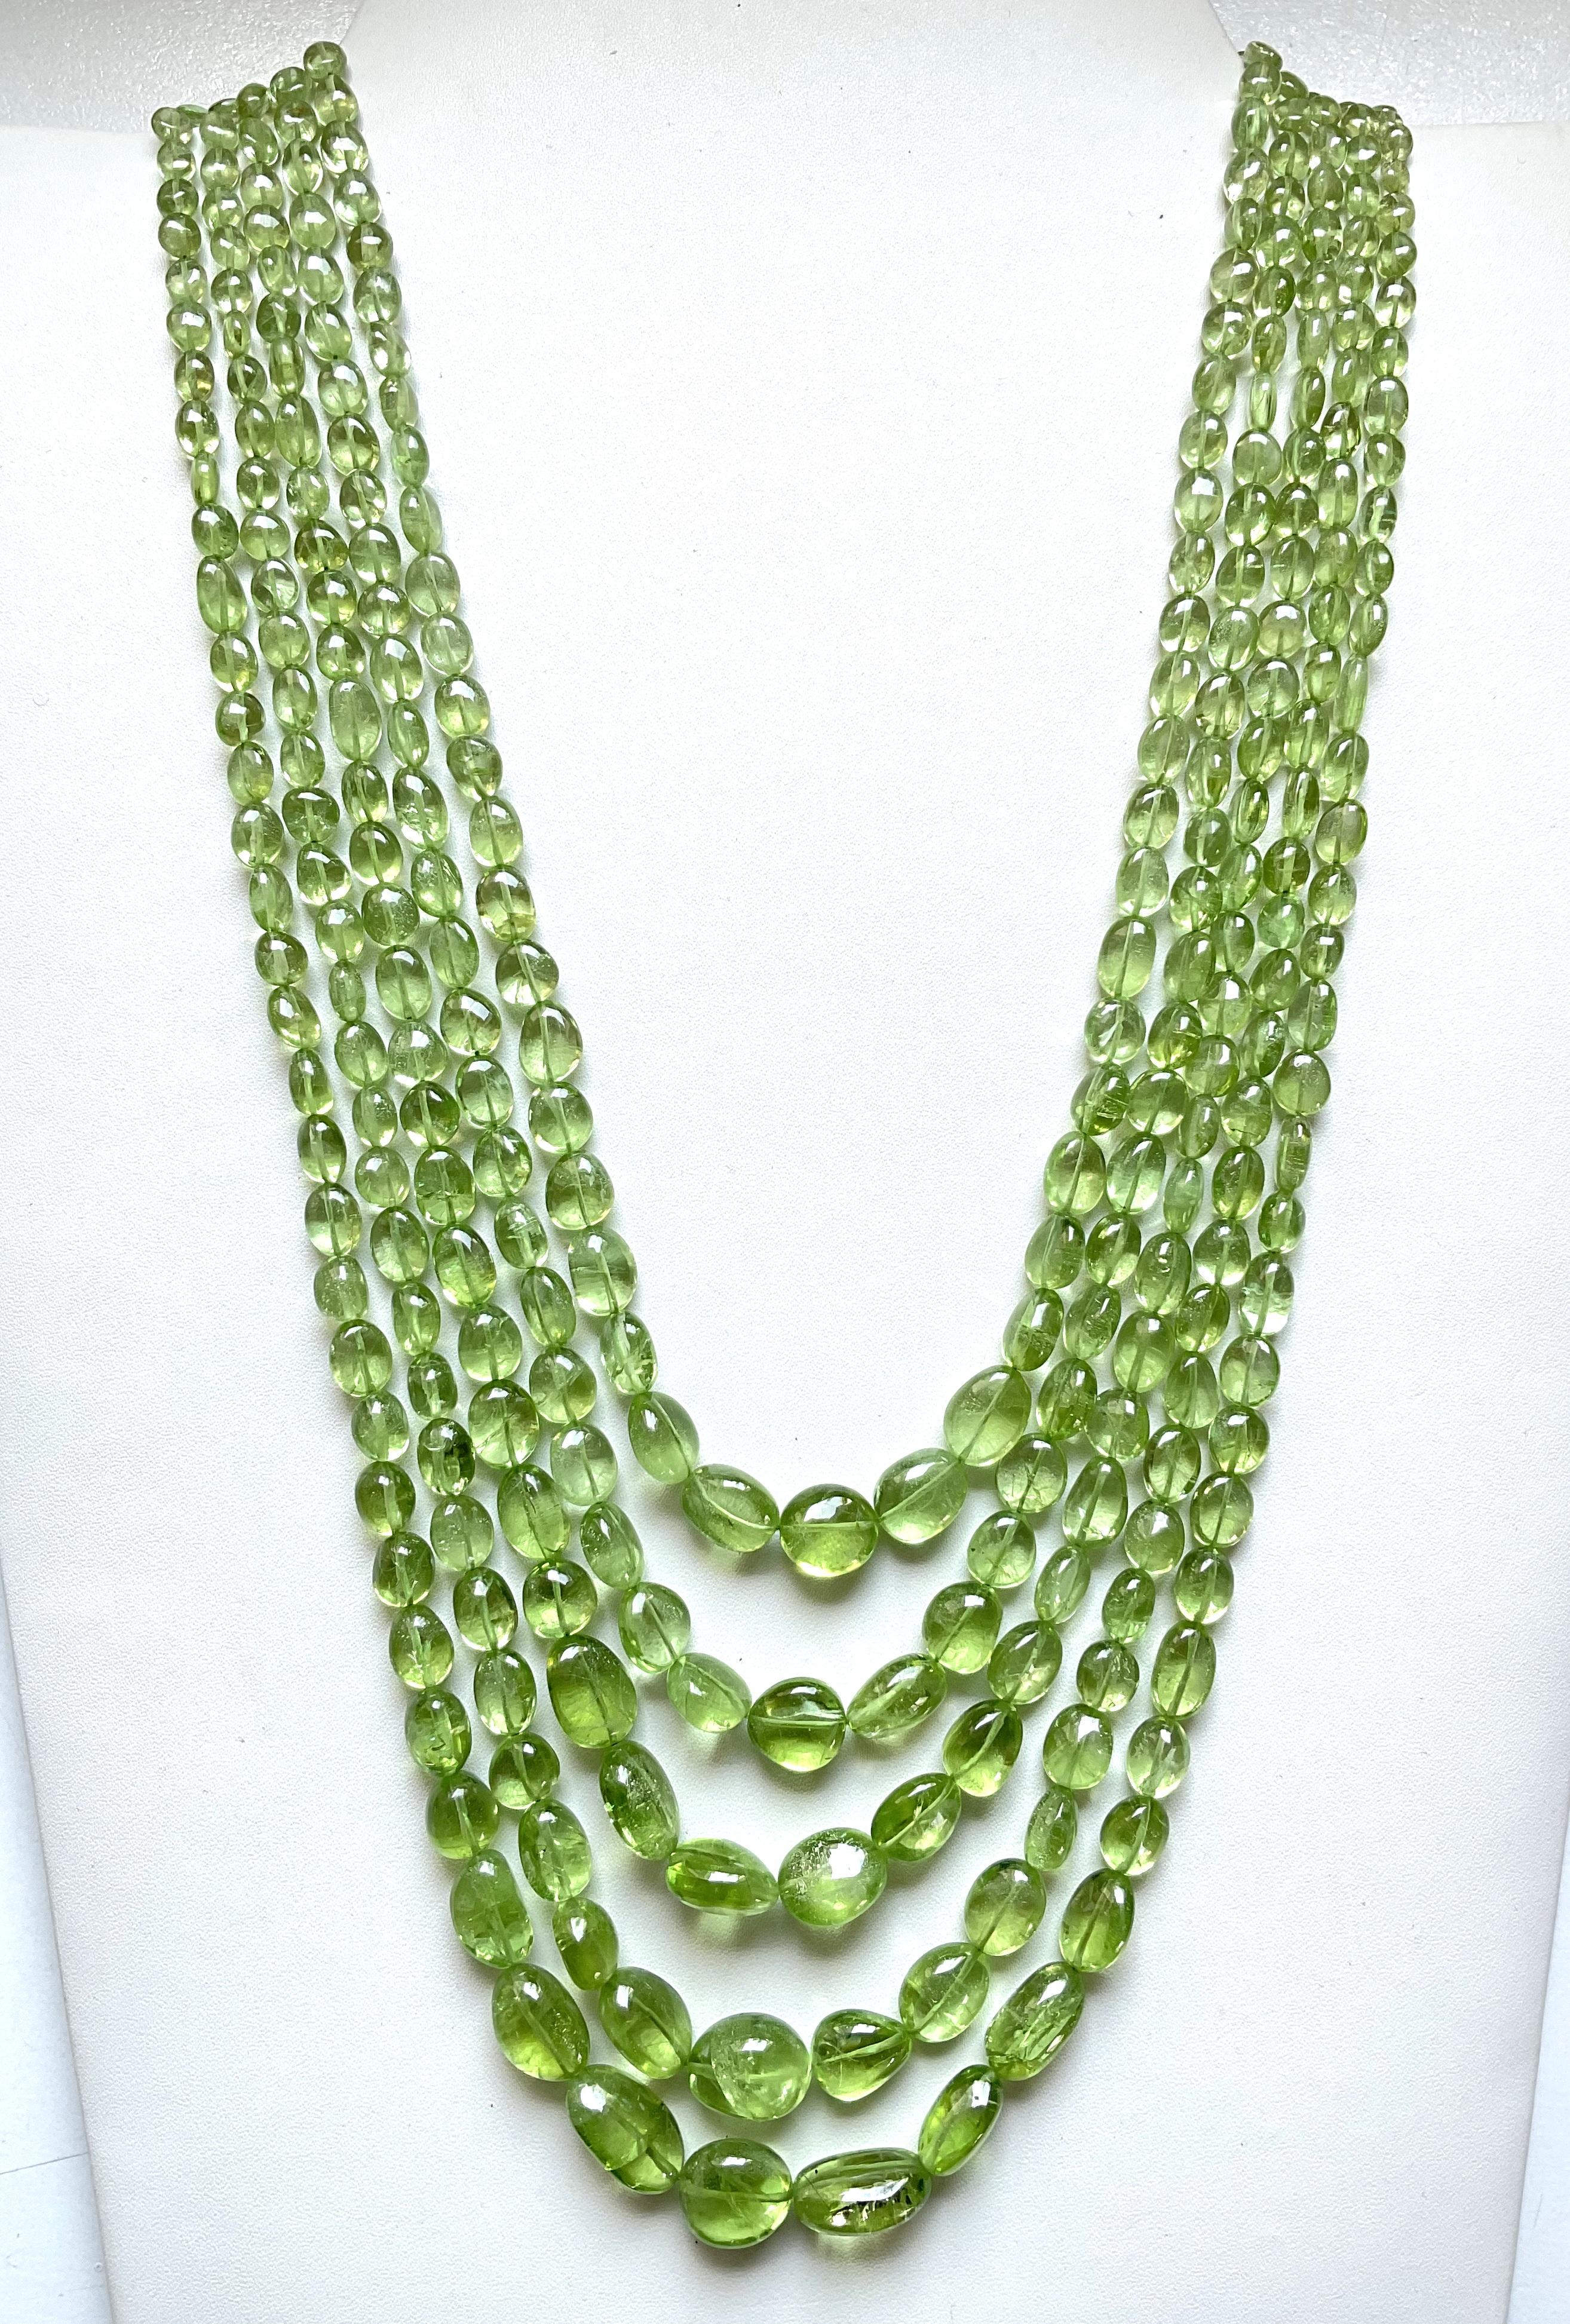 839.05 carats apple green peridot top quality plain tumbled natural necklace gem

Gemstone - Peridot
Size : 4x3 To 12x14 mm
Weight : 839.05 Carats
Strand - 5 Line